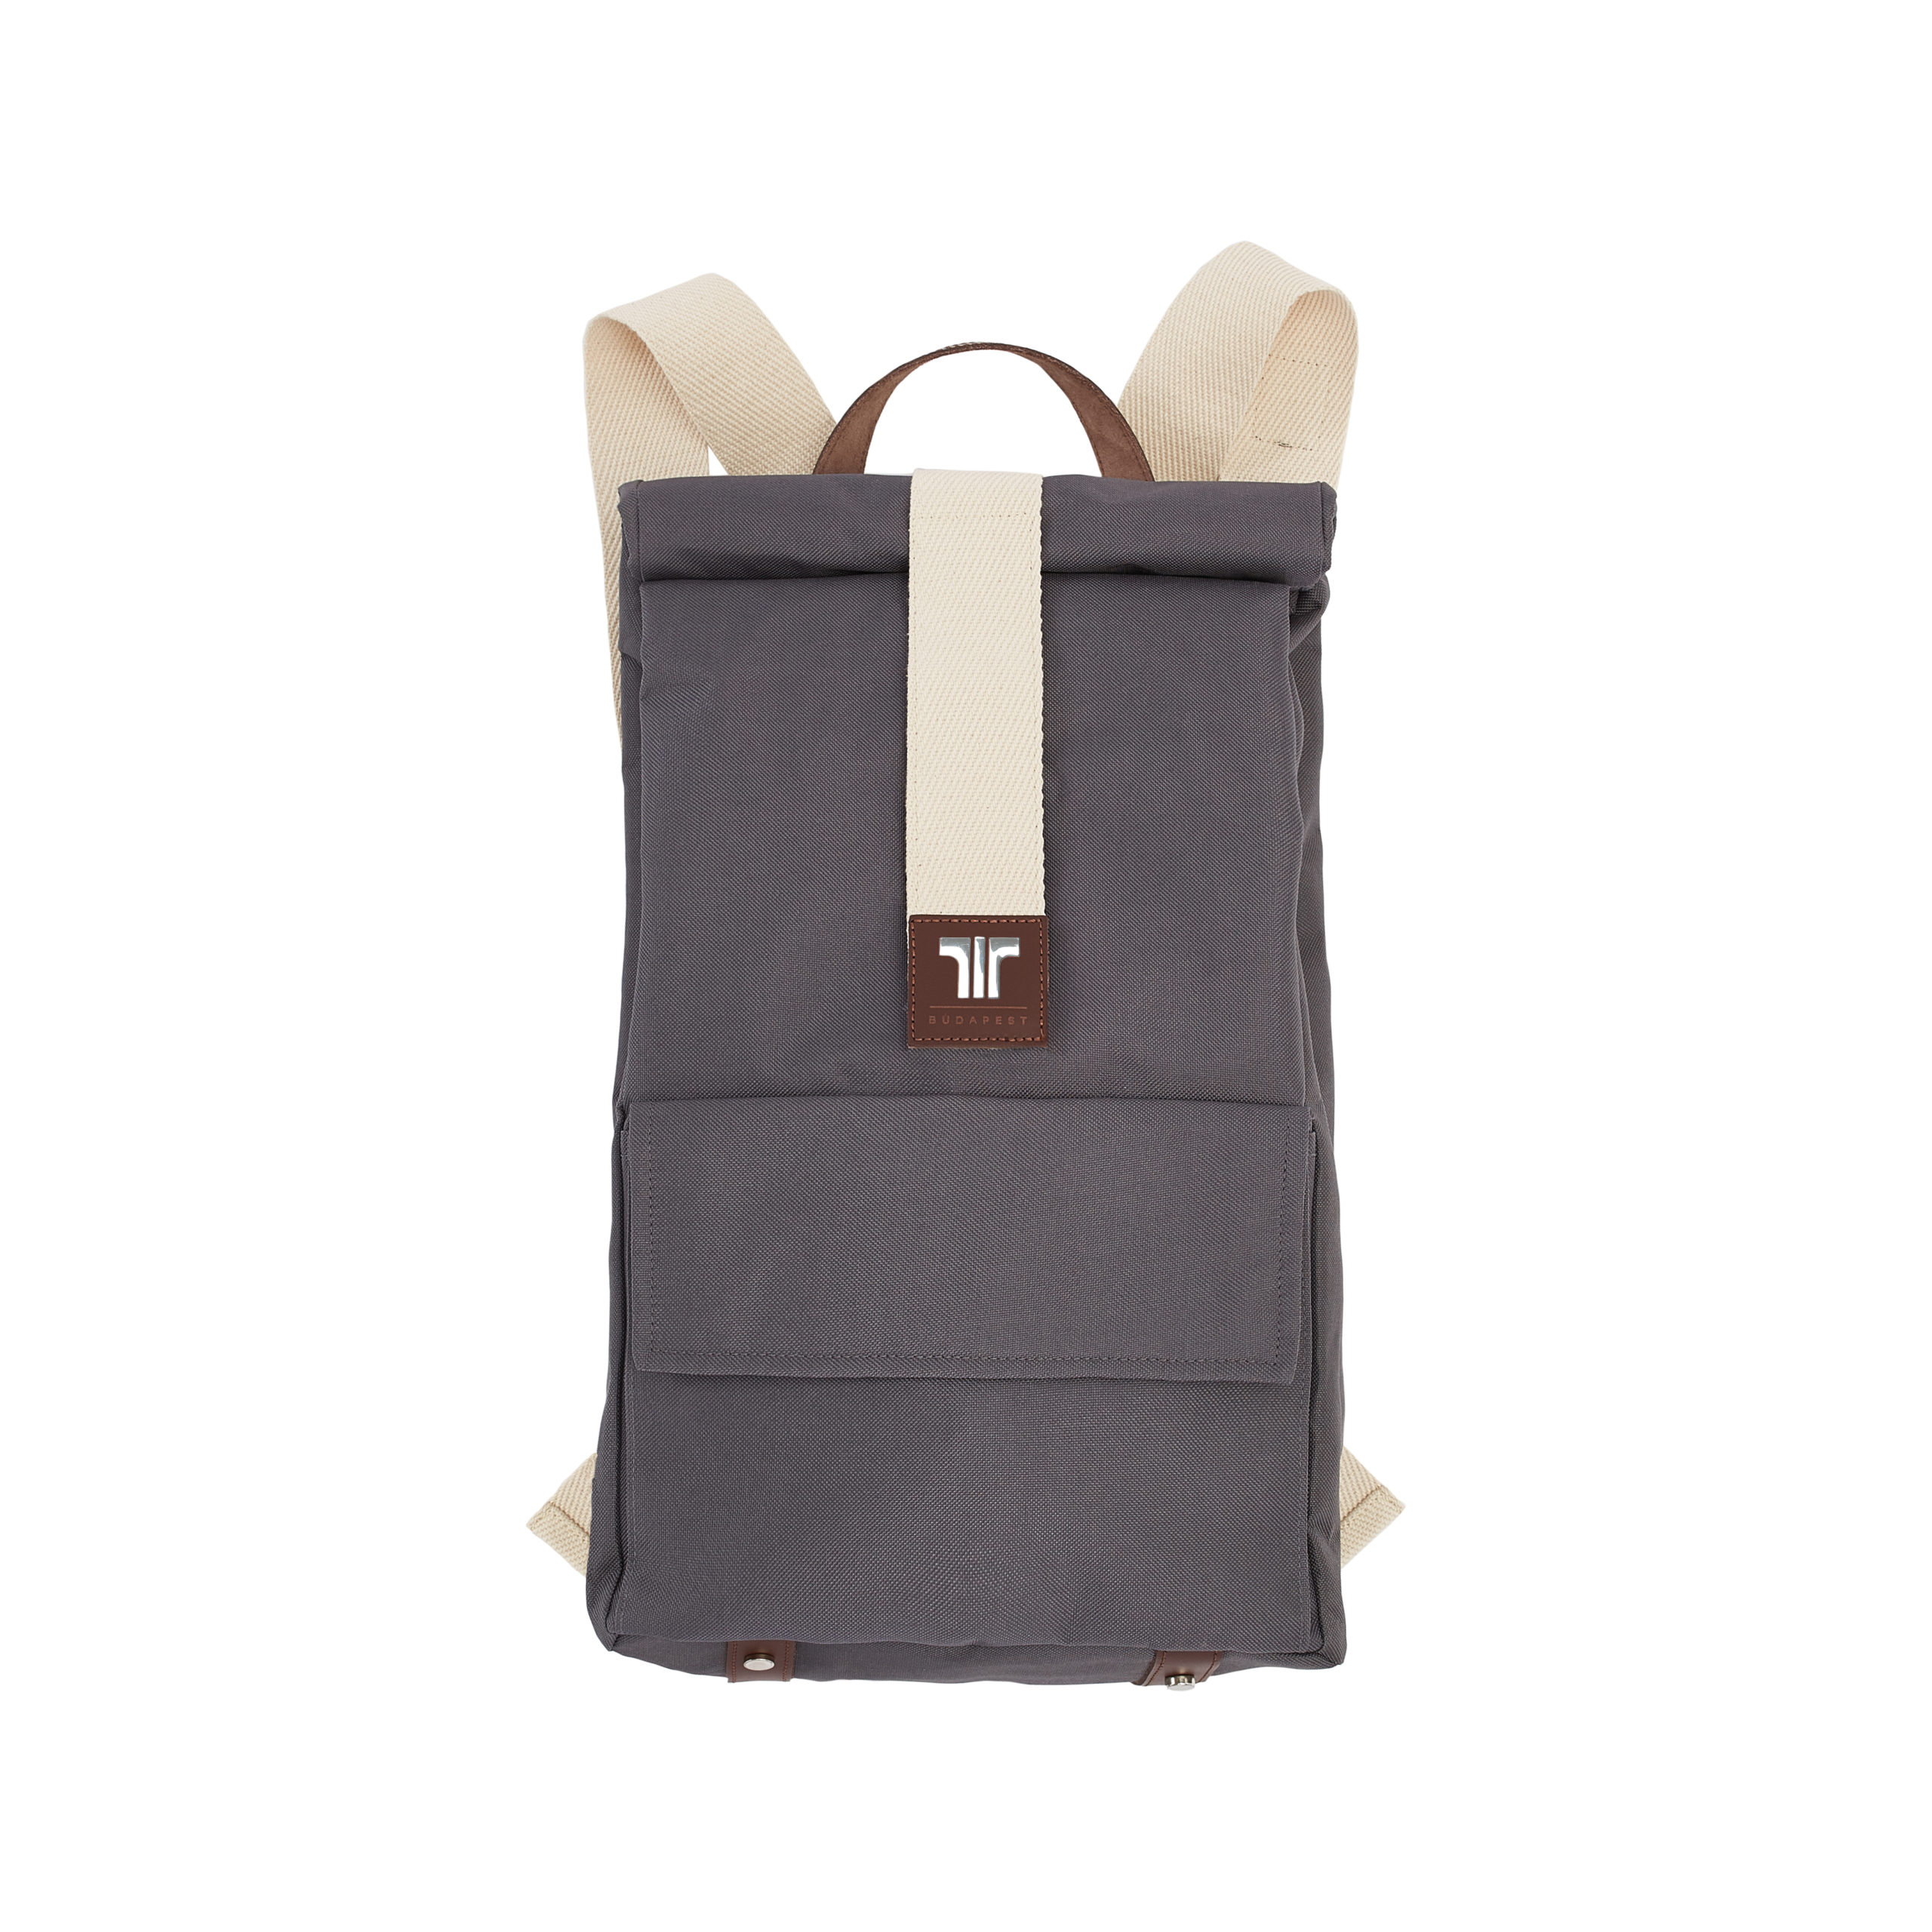 Tisza shoes - Backpack - Grey